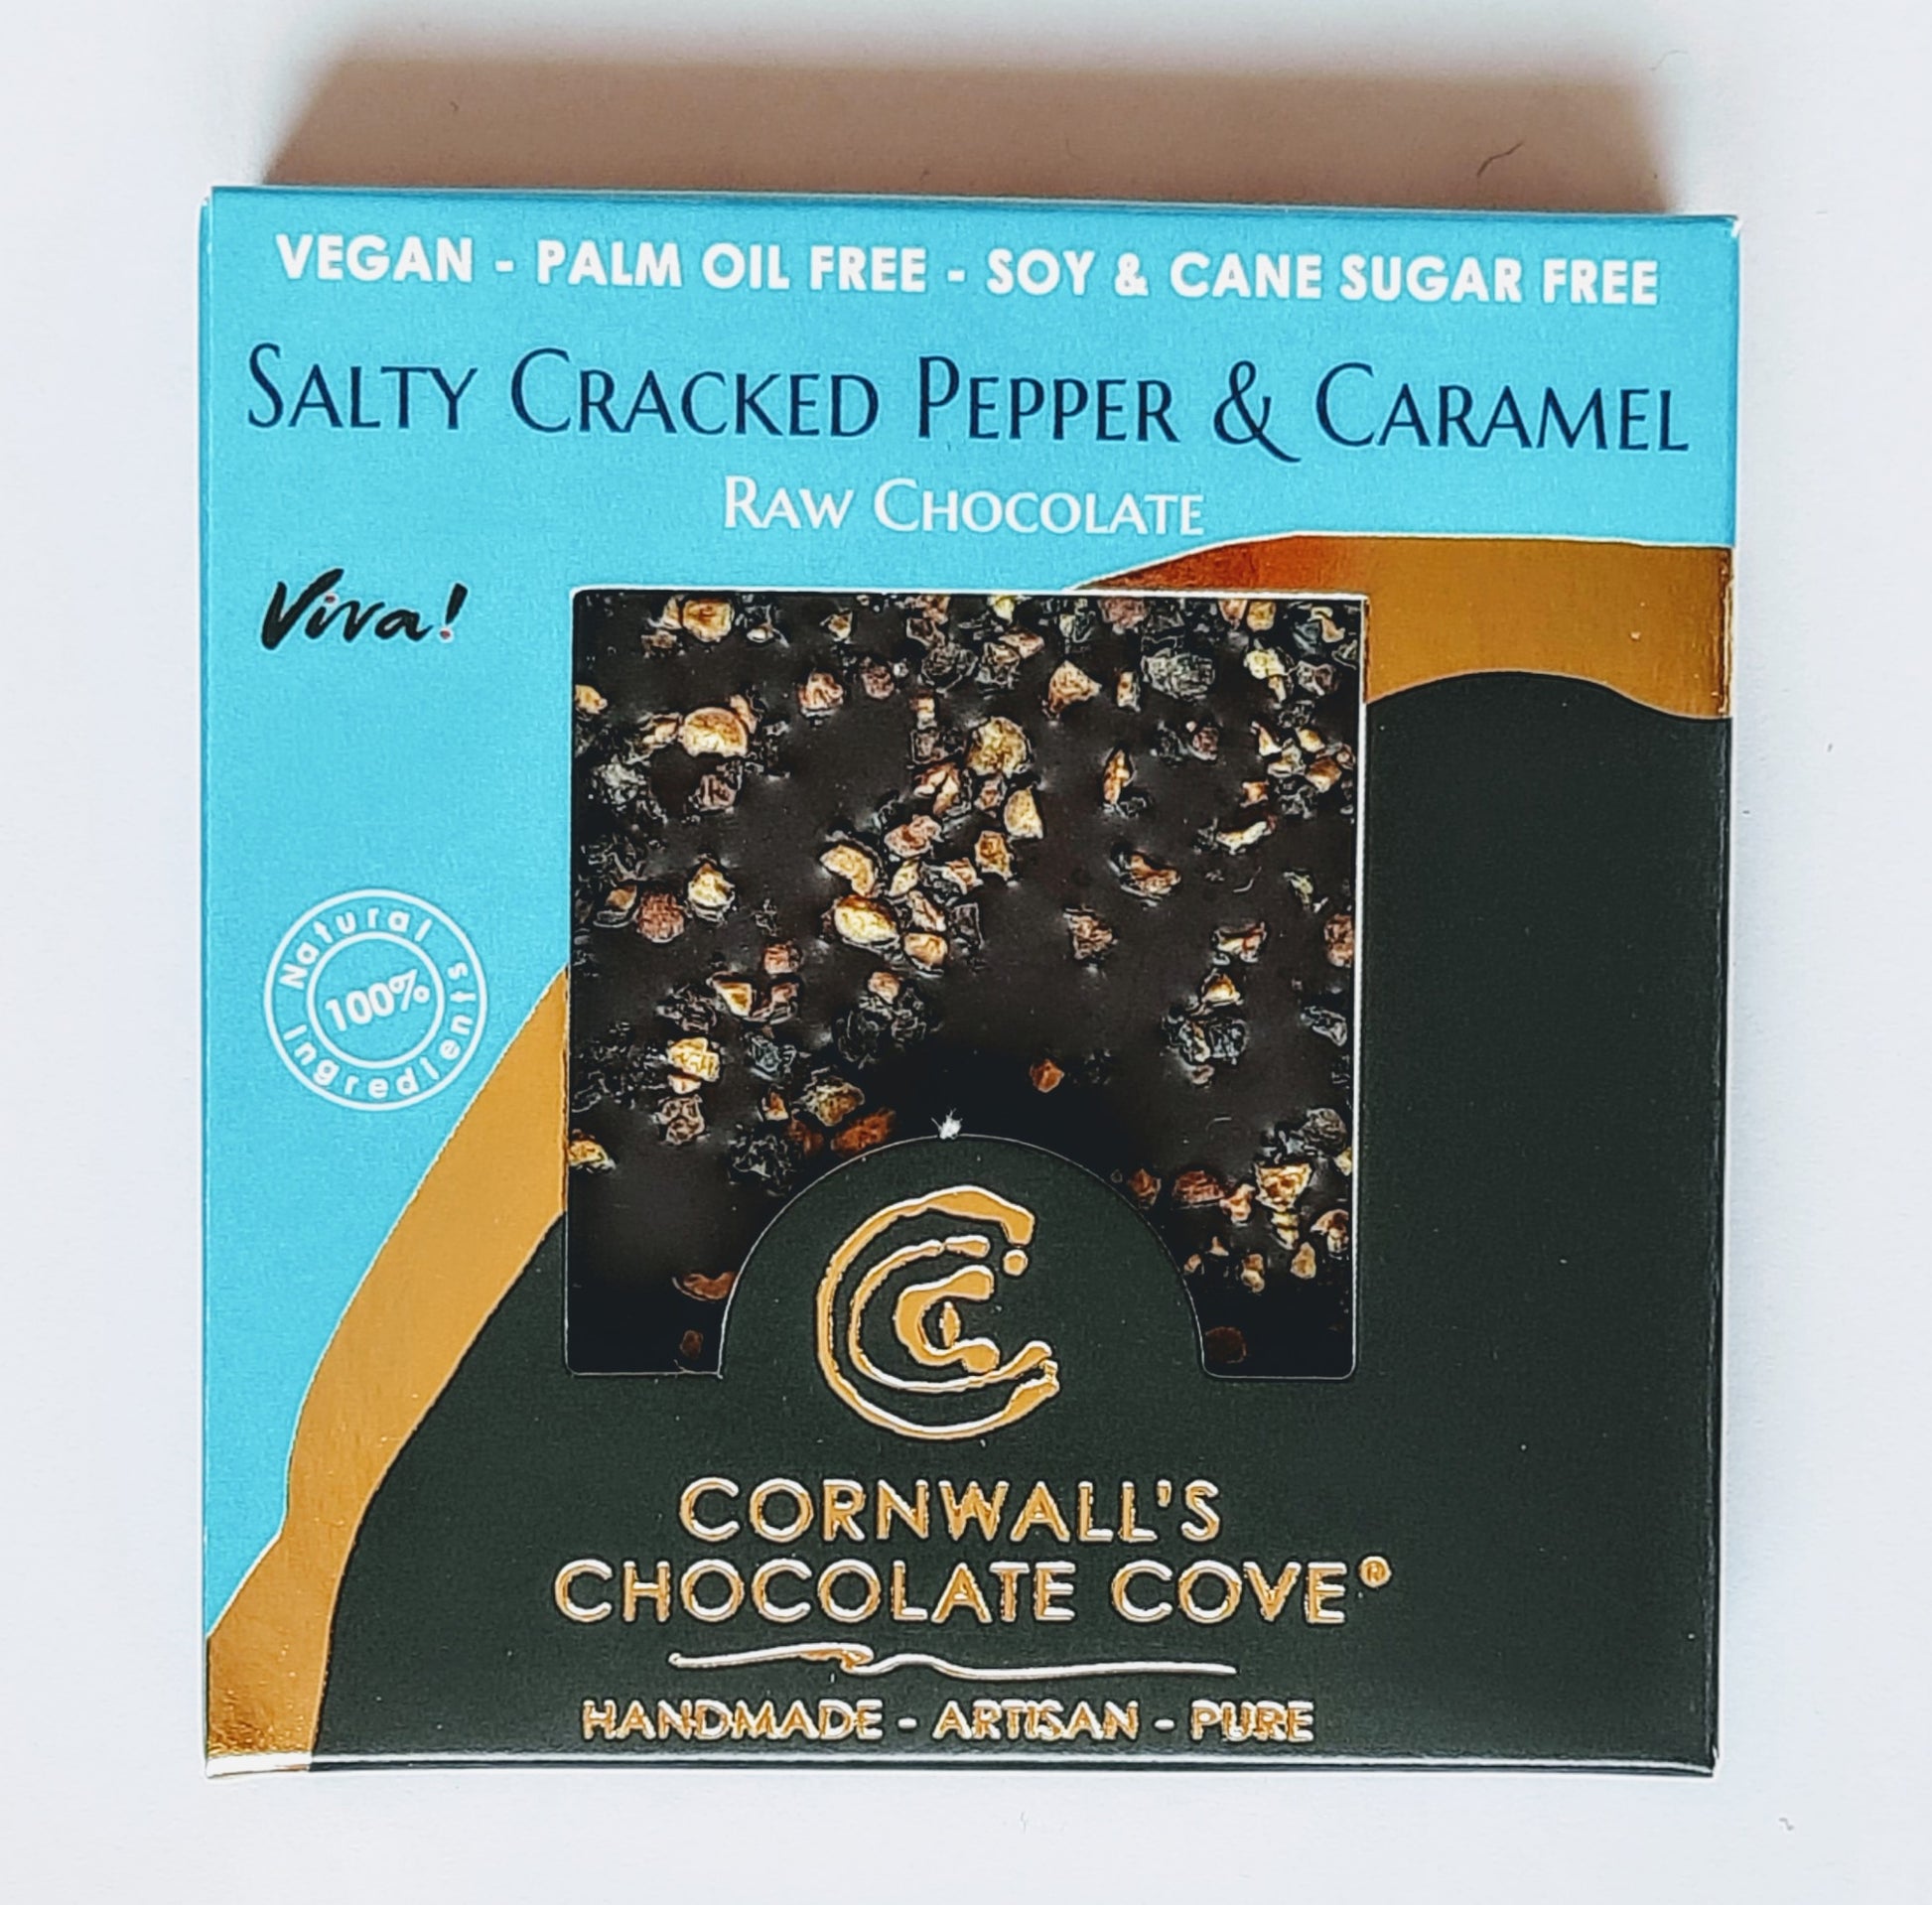 Cornwall's Chocolate Cove plant based, soya, palm oil, cane sugar and gluten free chocolate. Salty Cracked Pepper & Caramel